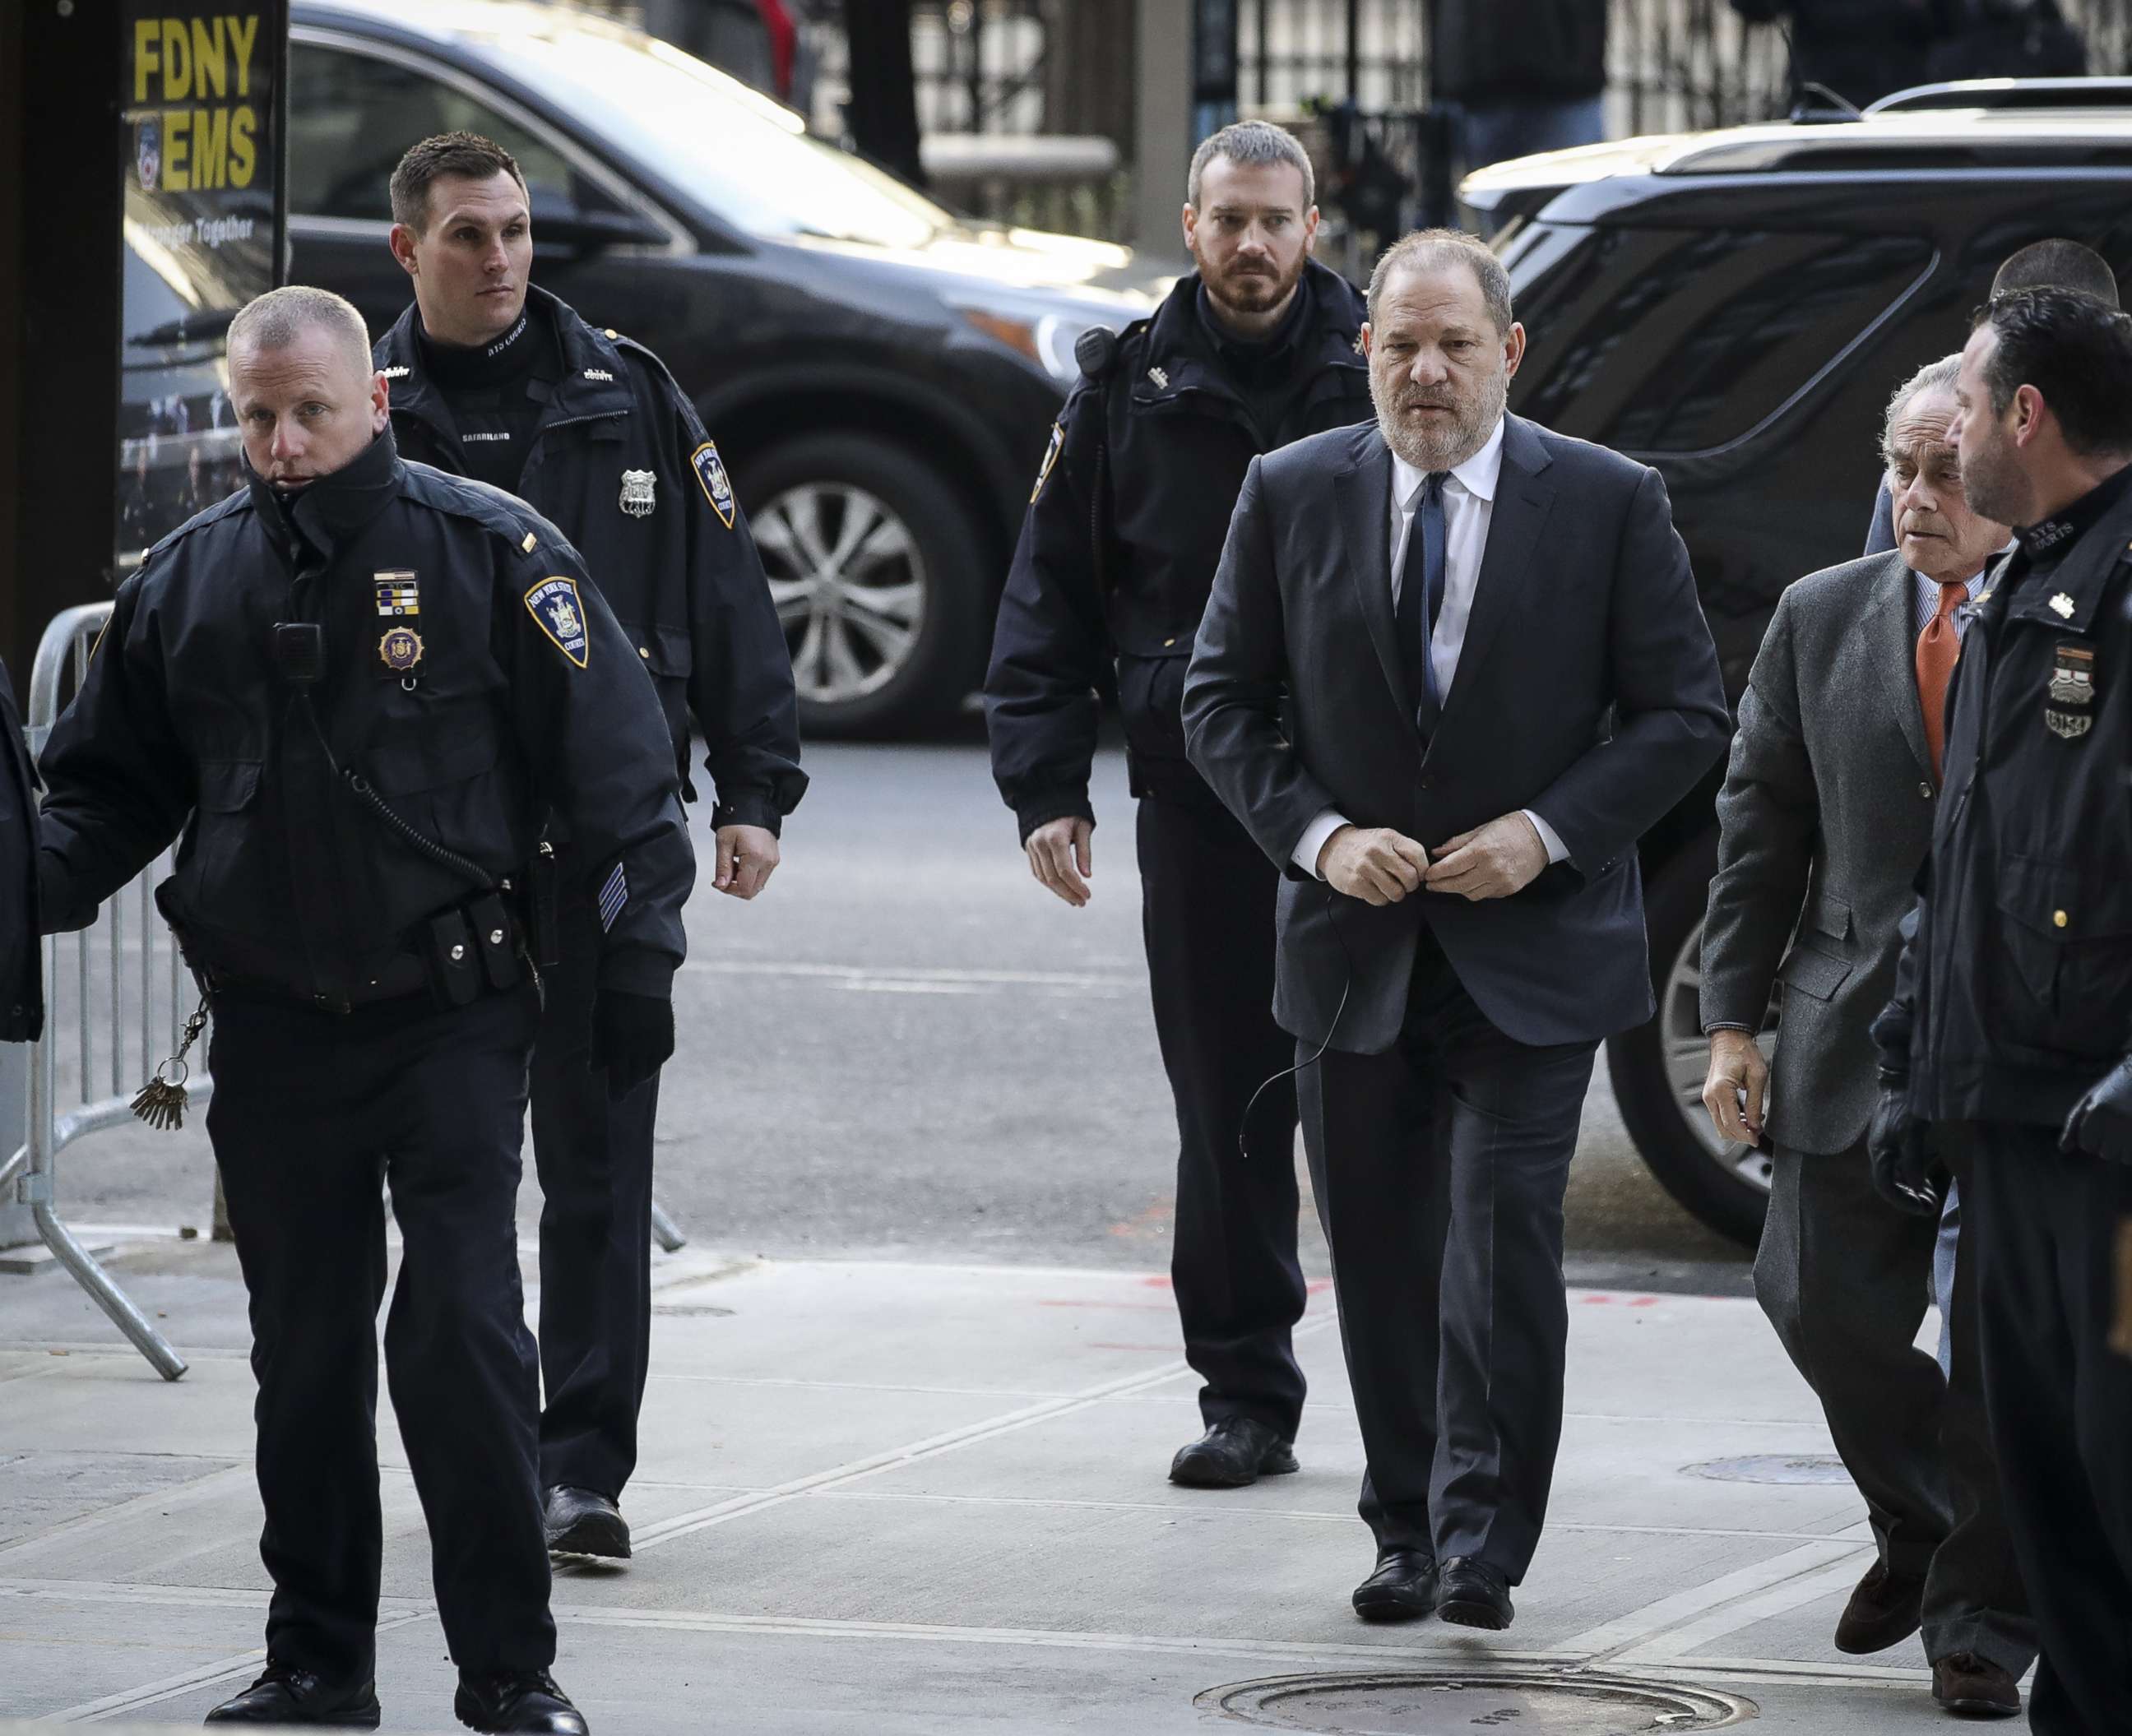 PHOTO: Harvey Weinstein arrives with his lawyer Ben Brafman for a court hearing at New York Criminal Court, Dec. 20, 2018, in New York City.